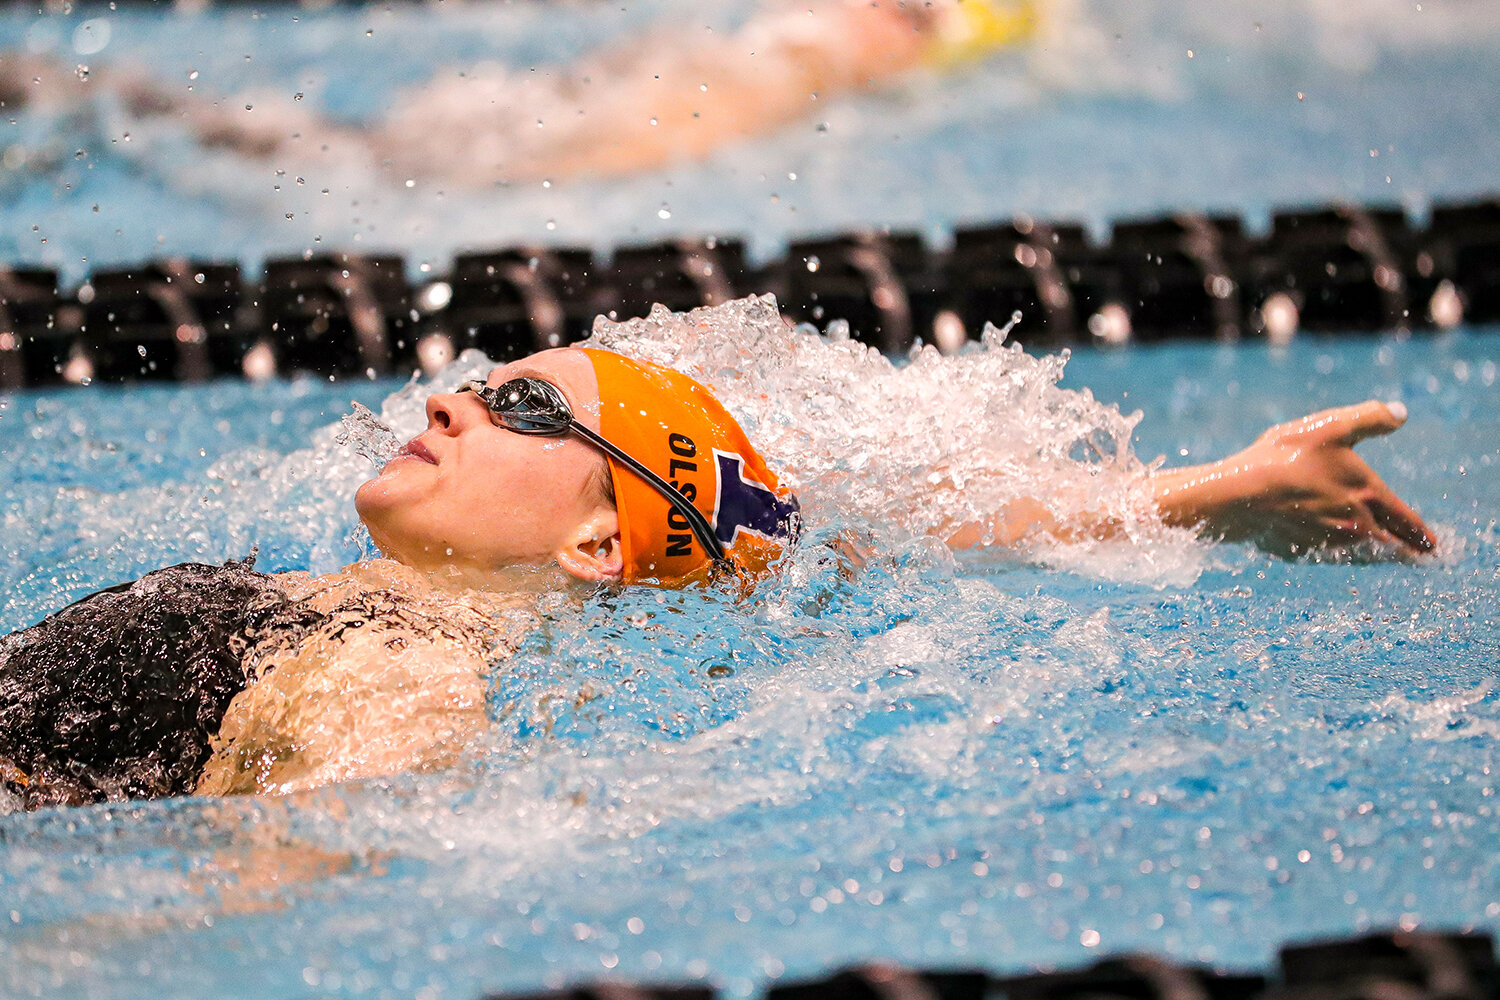  Abby Olson swims the consolation final of the 100 yard backstroke during the Big Ten Women’s Swimming and Diving Championships at the Campus Welfare and Recreation Center in Iowa City, IA on Friday, Feb. 21, 2020. 